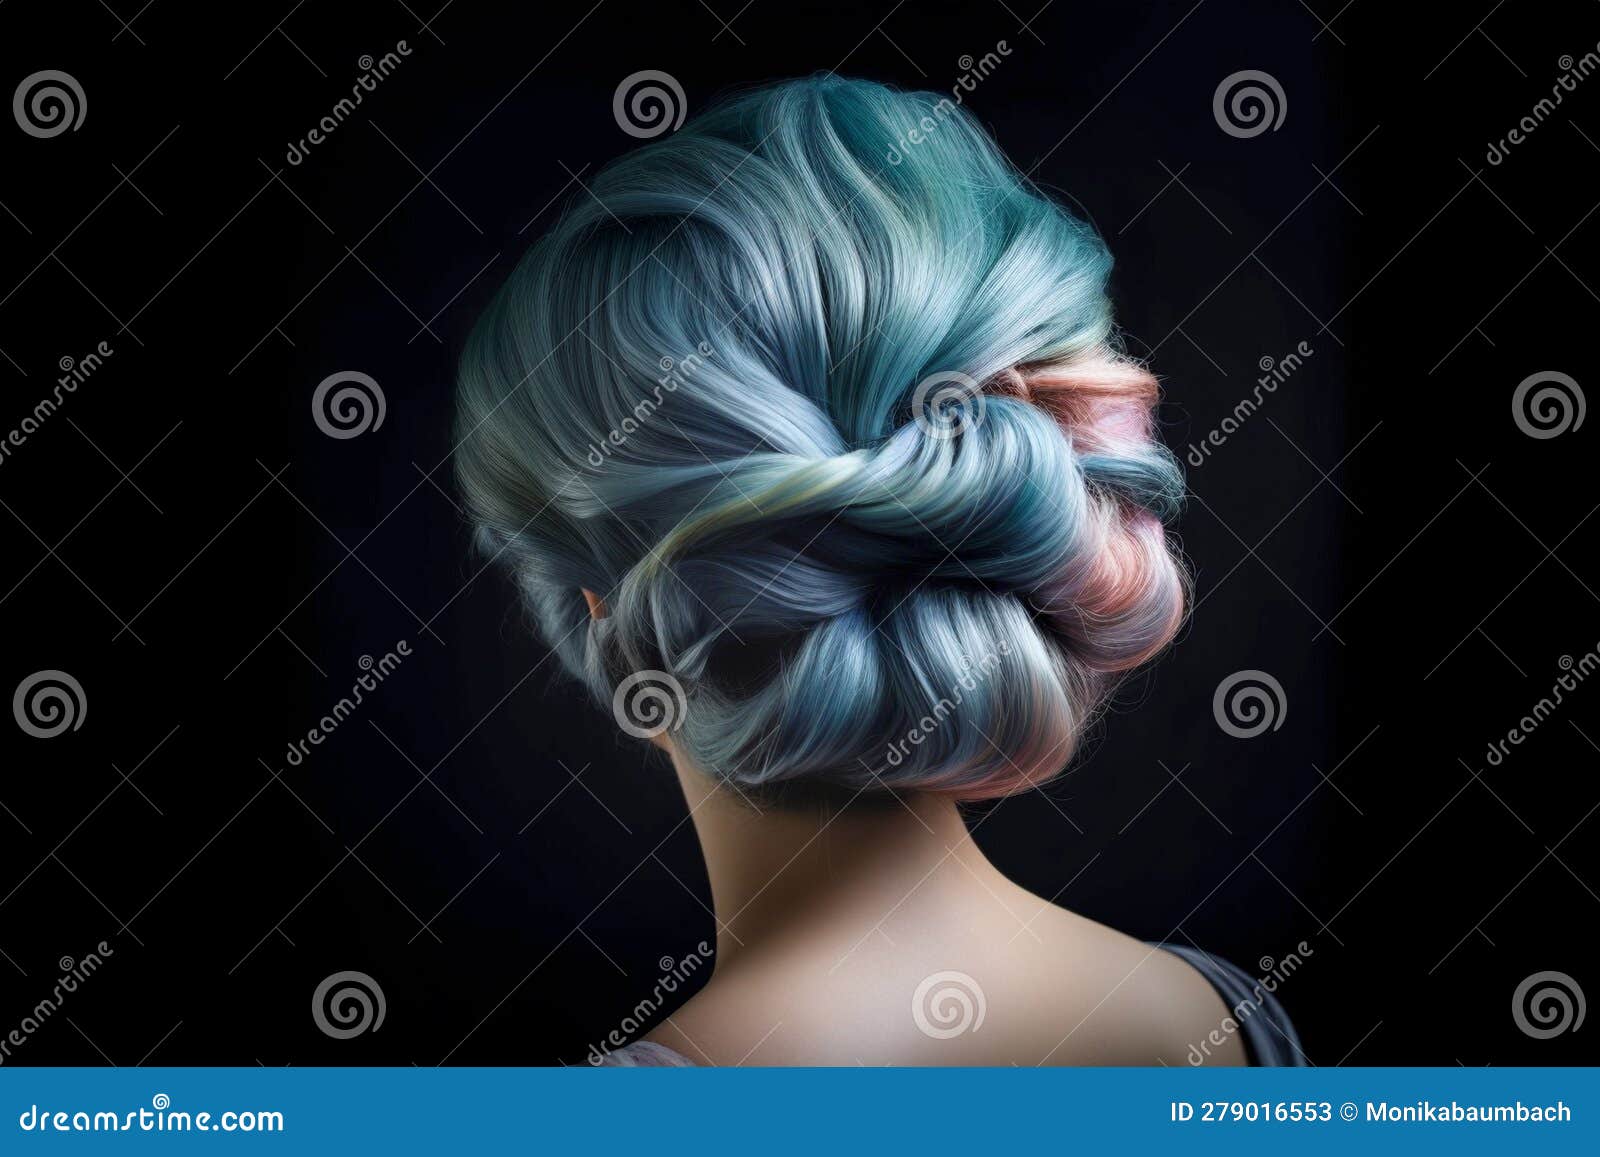 Pastel Blue and Pink Hair Dye - wide 5